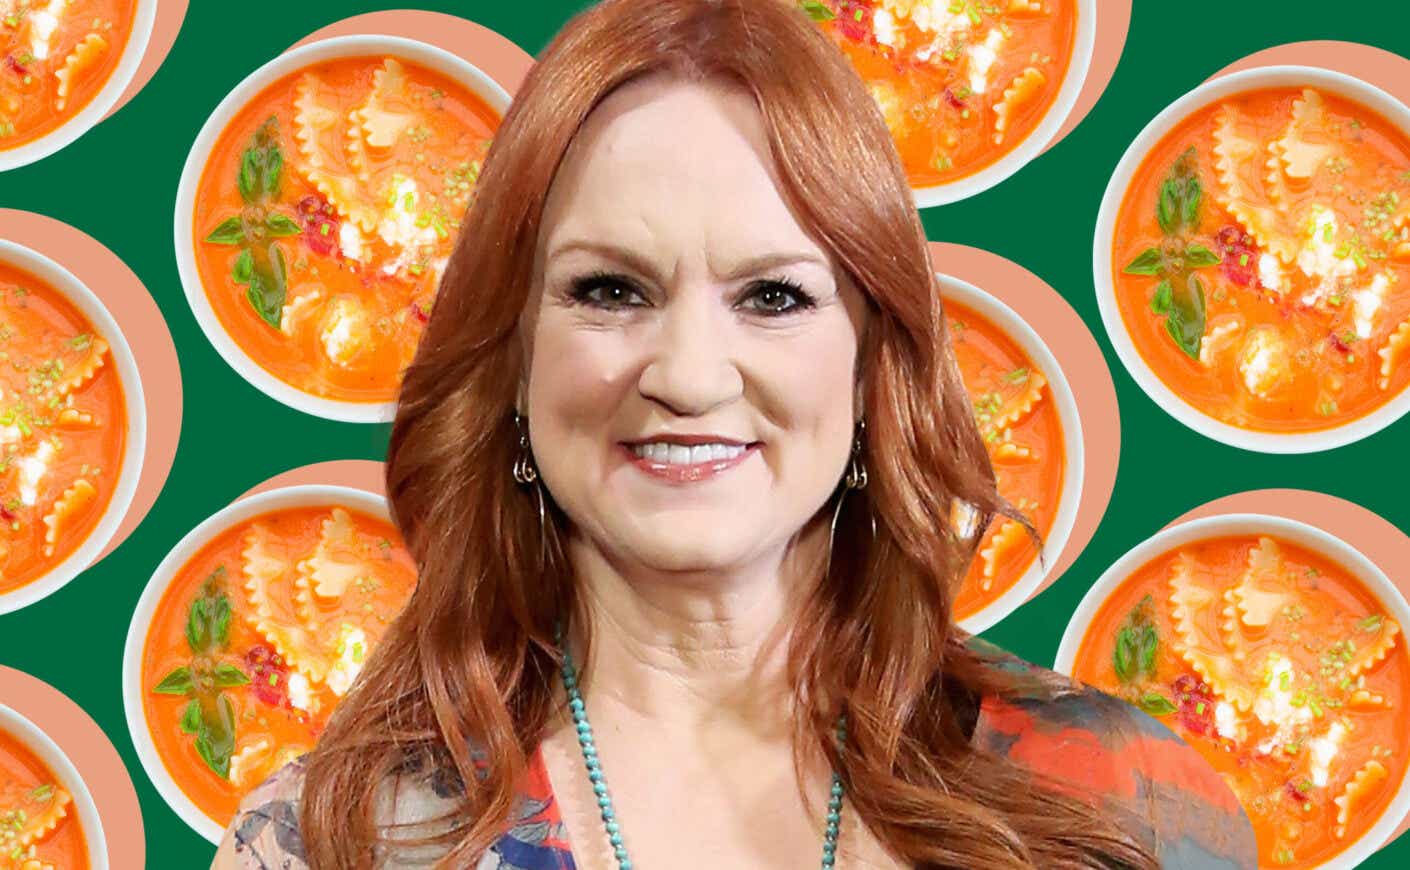 The Pioneer Woman Ree Drummond's Holiday Gift Guide Is Here